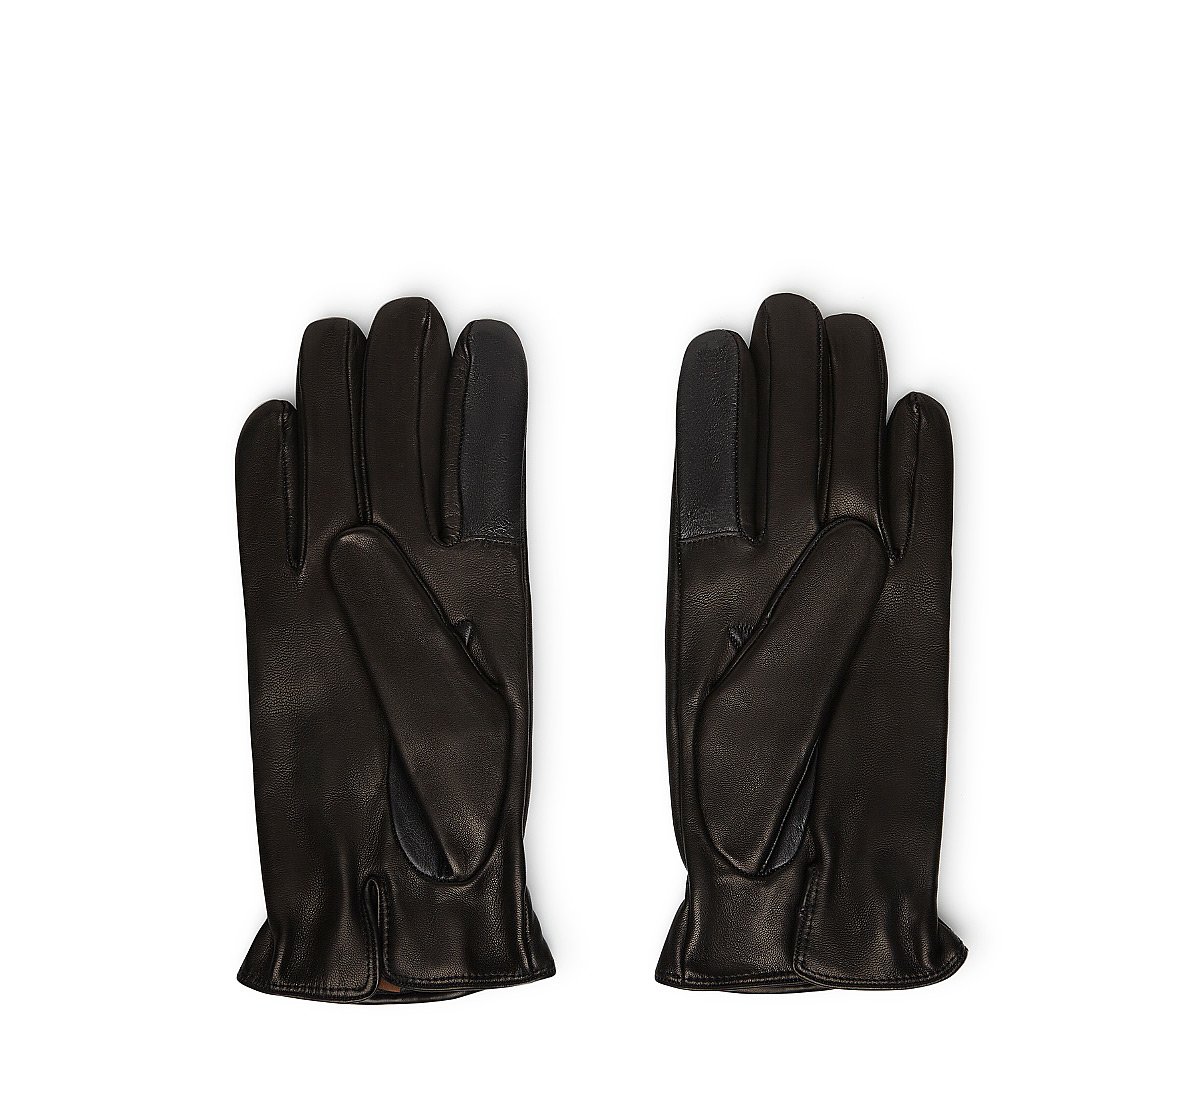 Black leather gloves with elastic